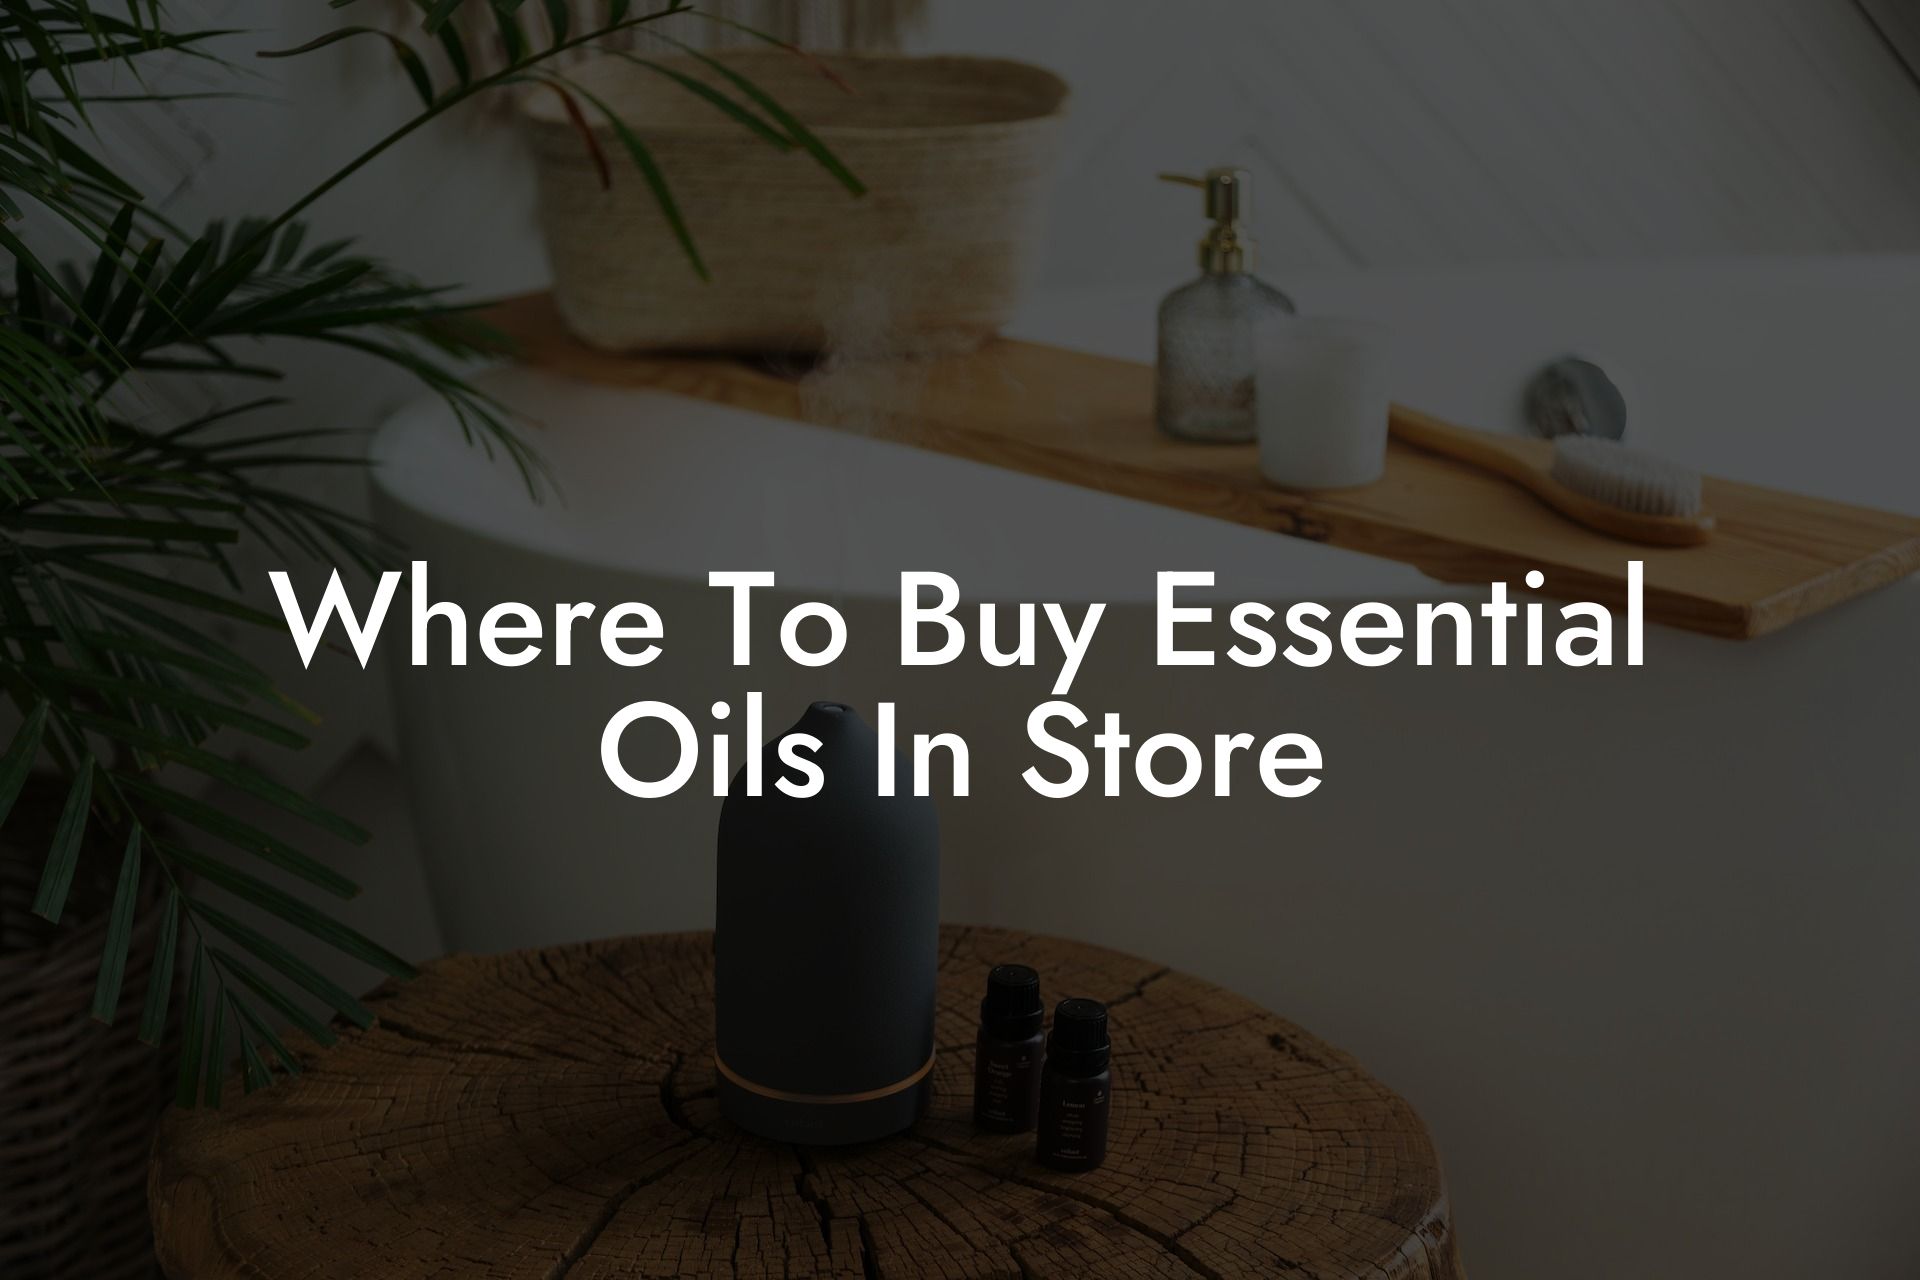 Where To Buy Essential Oils In Store